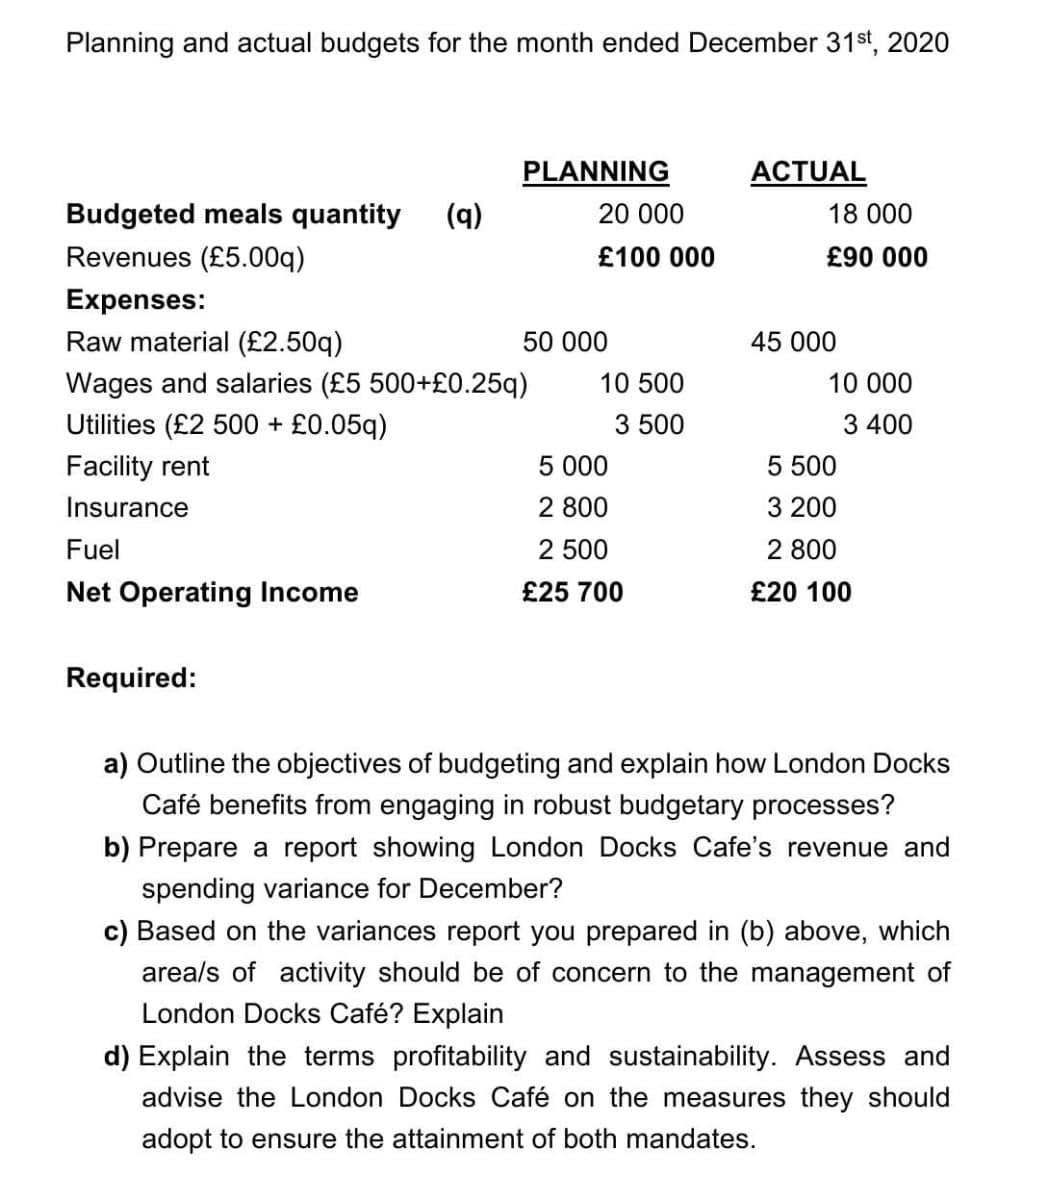 Planning and actual budgets for the month ended December 31st, 2020
PLANNING
ACTUAL
Budgeted meals quantity
(q)
20 000
18 000
Revenues (£5.00q)
£100 000
£90 000
Expenses:
Raw material (£2.50q)
50 000
45 000
10 000
Wages and salaries (£5 500+£0.25q)
Utilities (£2 500 + £0.05q)
Facility rent
10 500
3 500
3 400
5 000
5 500
Insurance
2 800
3 200
Fuel
2 500
2 800
Net Operating Income
£25 700
£20 100
Required:
a) Outline the objectives of budgeting and explain how London Docks
Café benefits from engaging in robust budgetary processes?
b) Prepare a report showing London Docks Cafe's revenue and
spending variance for December?
c) Based on the variances report you prepared in (b) above, which
area/s of activity should be of concern to the management of
London Docks Café? Explain
d) Explain the terms profitability and sustainability. Assess and
advise the London Docks Café on the measures they should
adopt to ensure the attainment of both mandates.
